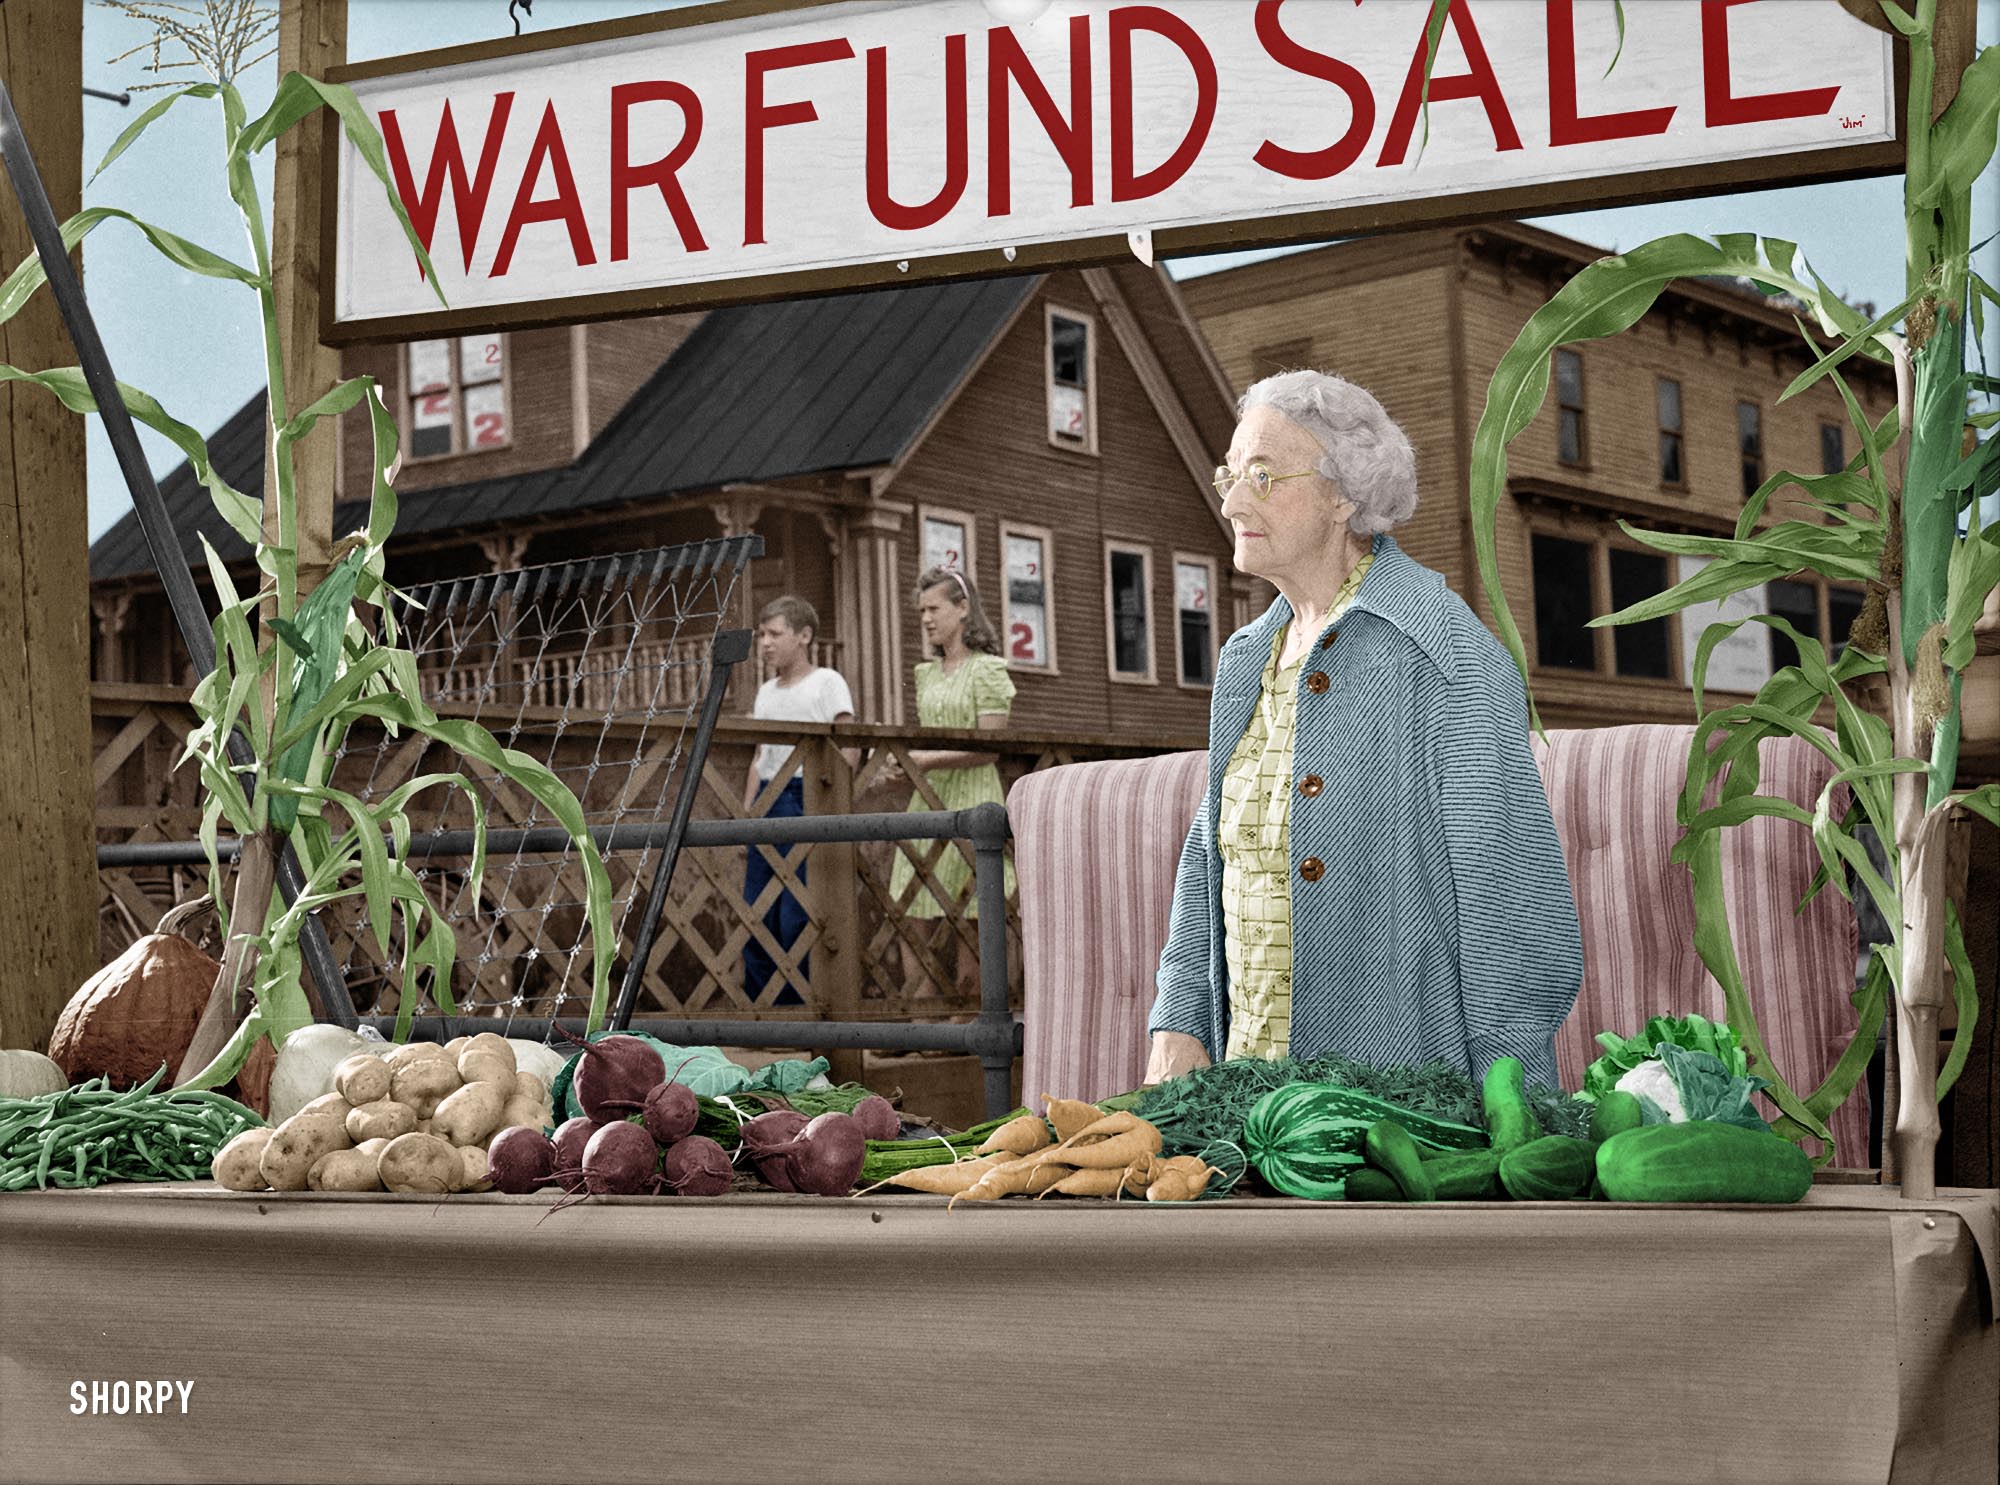 This is my version of the picture Victory Veggies, 1942. Hardwick, Vermont. "Mrs. Alice White at the Victory Store vegetable counter selling donated farm produce, money from which will go to the War Fund."